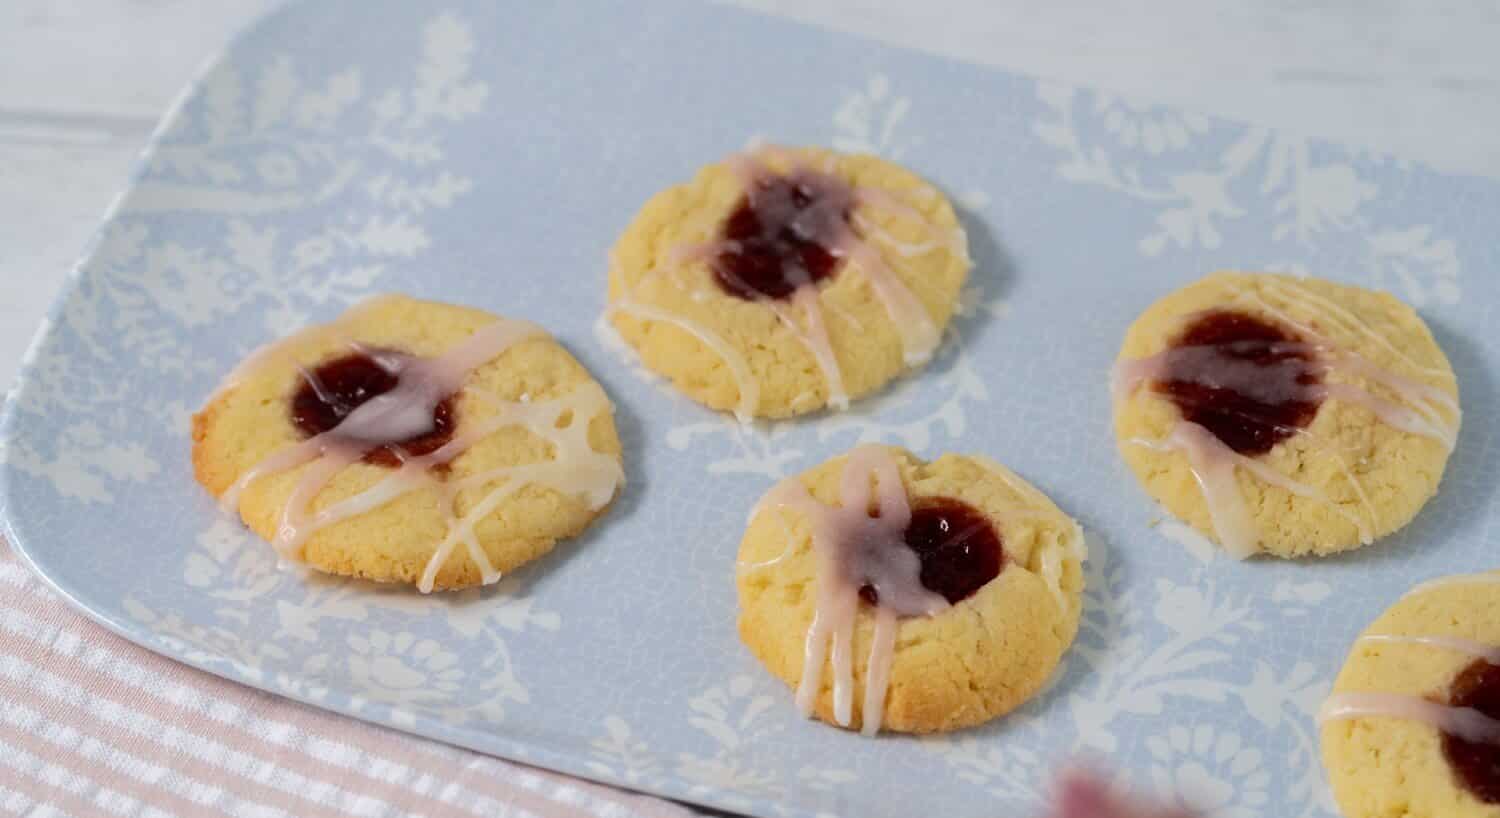 Five homemade thumbprint cookies on a blue and white floral plate